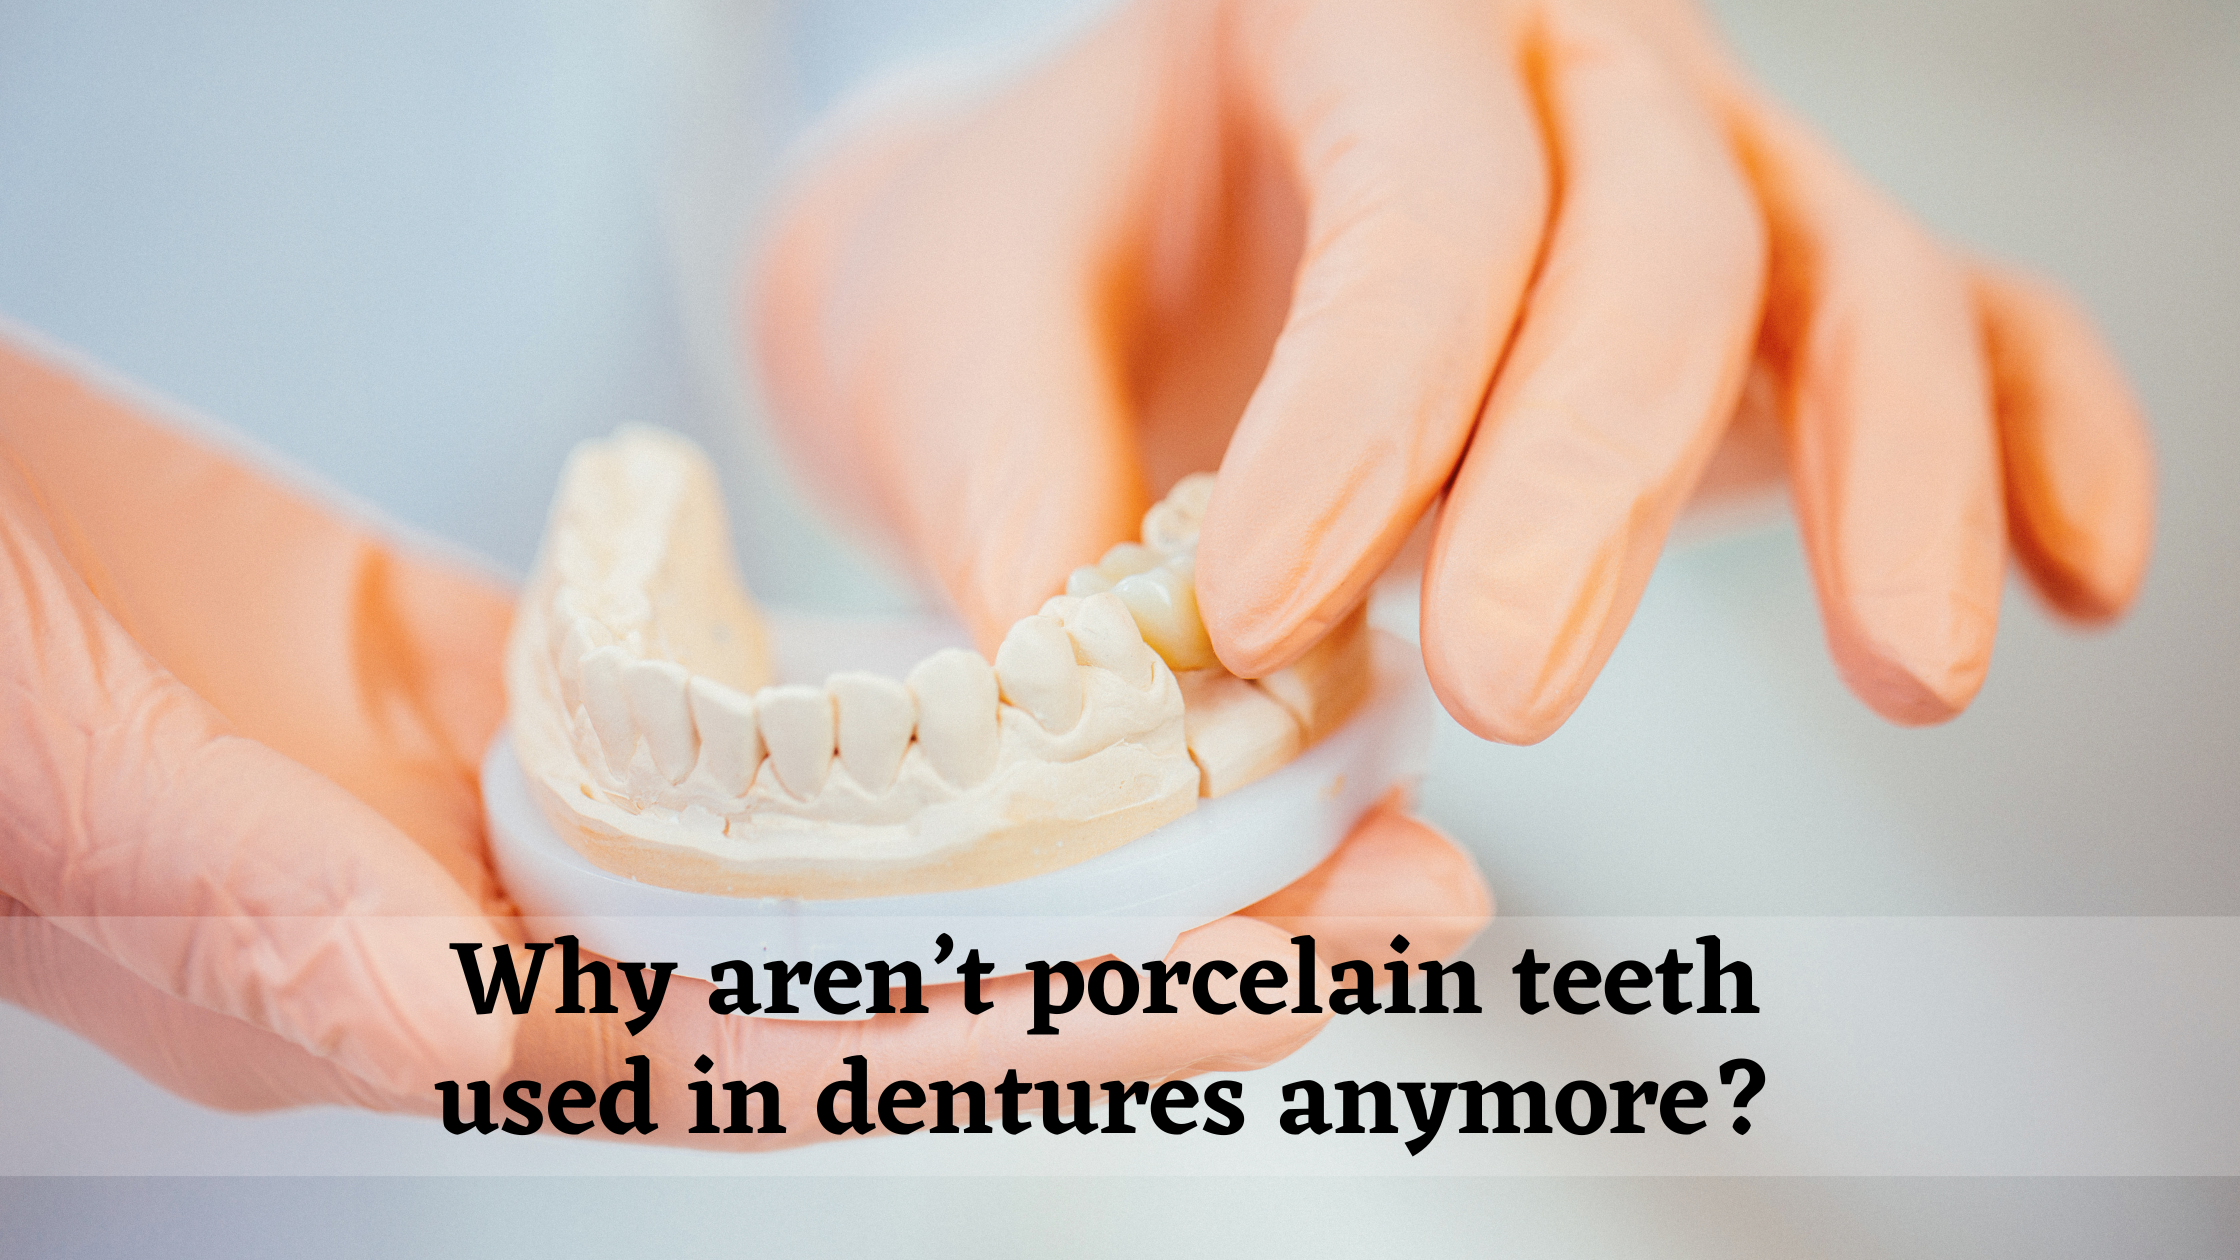 Why aren’t porcelain teeth used in dentures anymore?